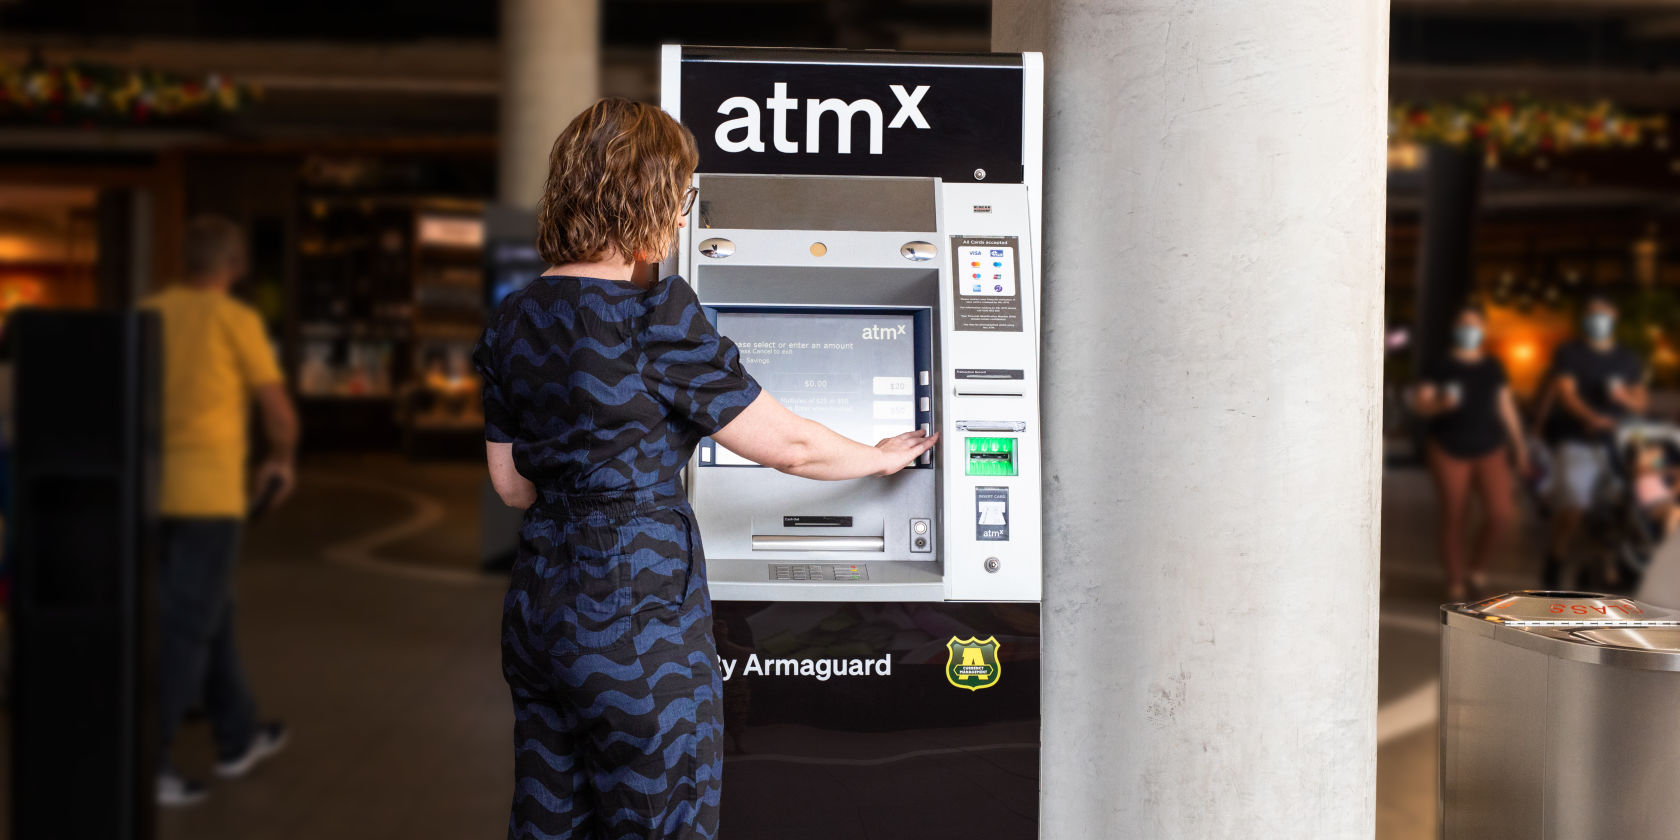 Suncorp Bank and Armaguard ATM network launch fee-free access